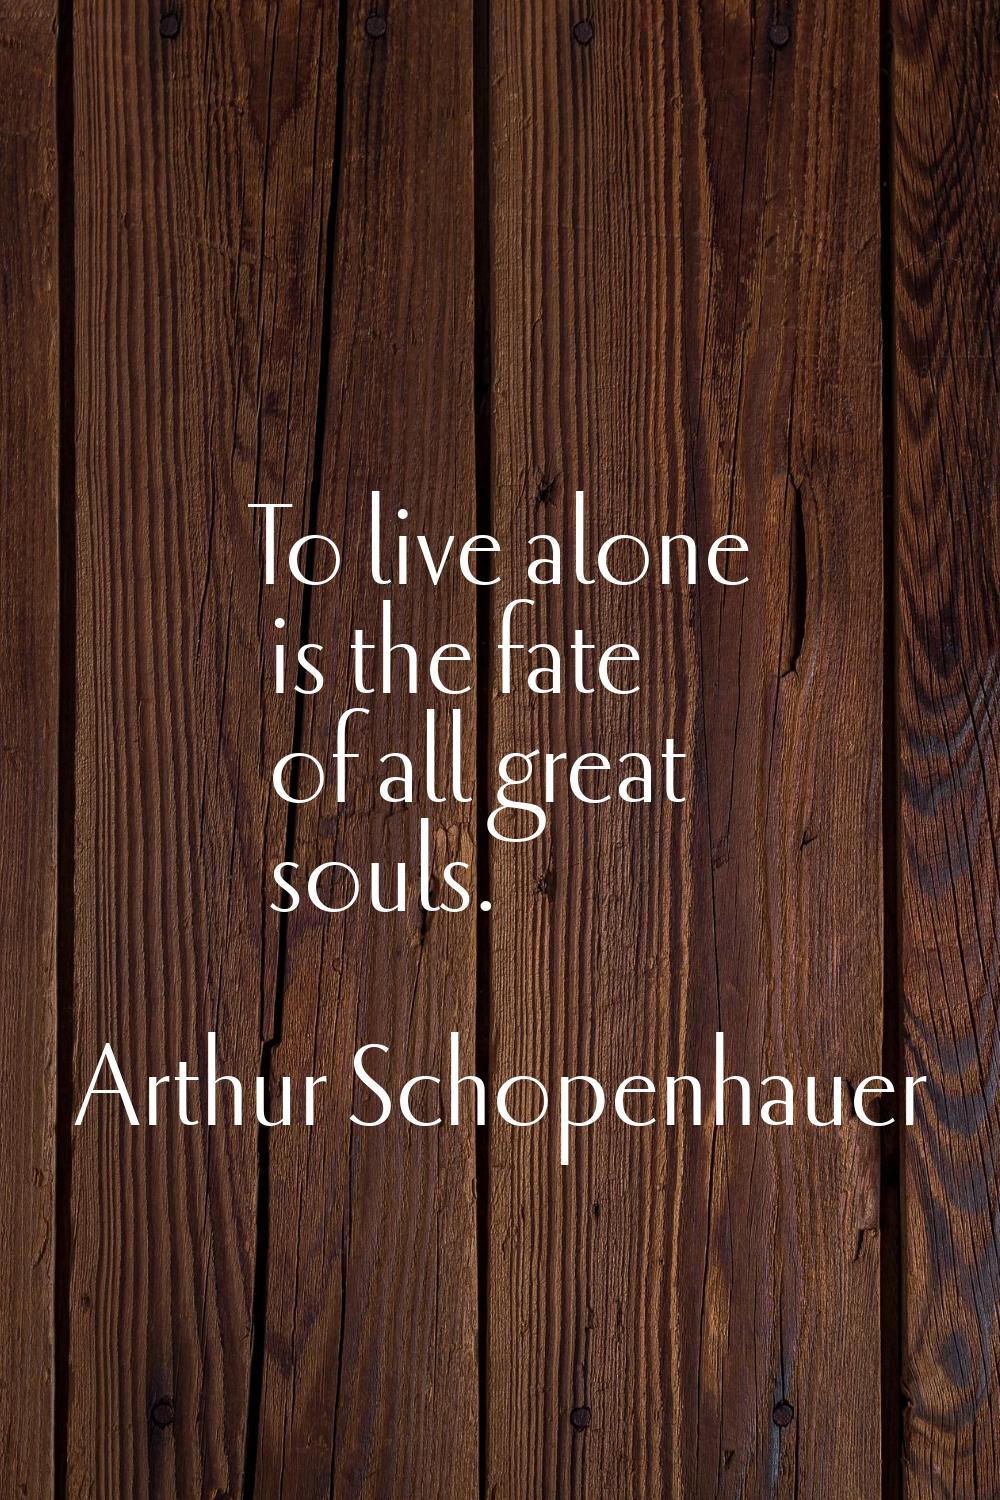 To live alone is the fate of all great souls.